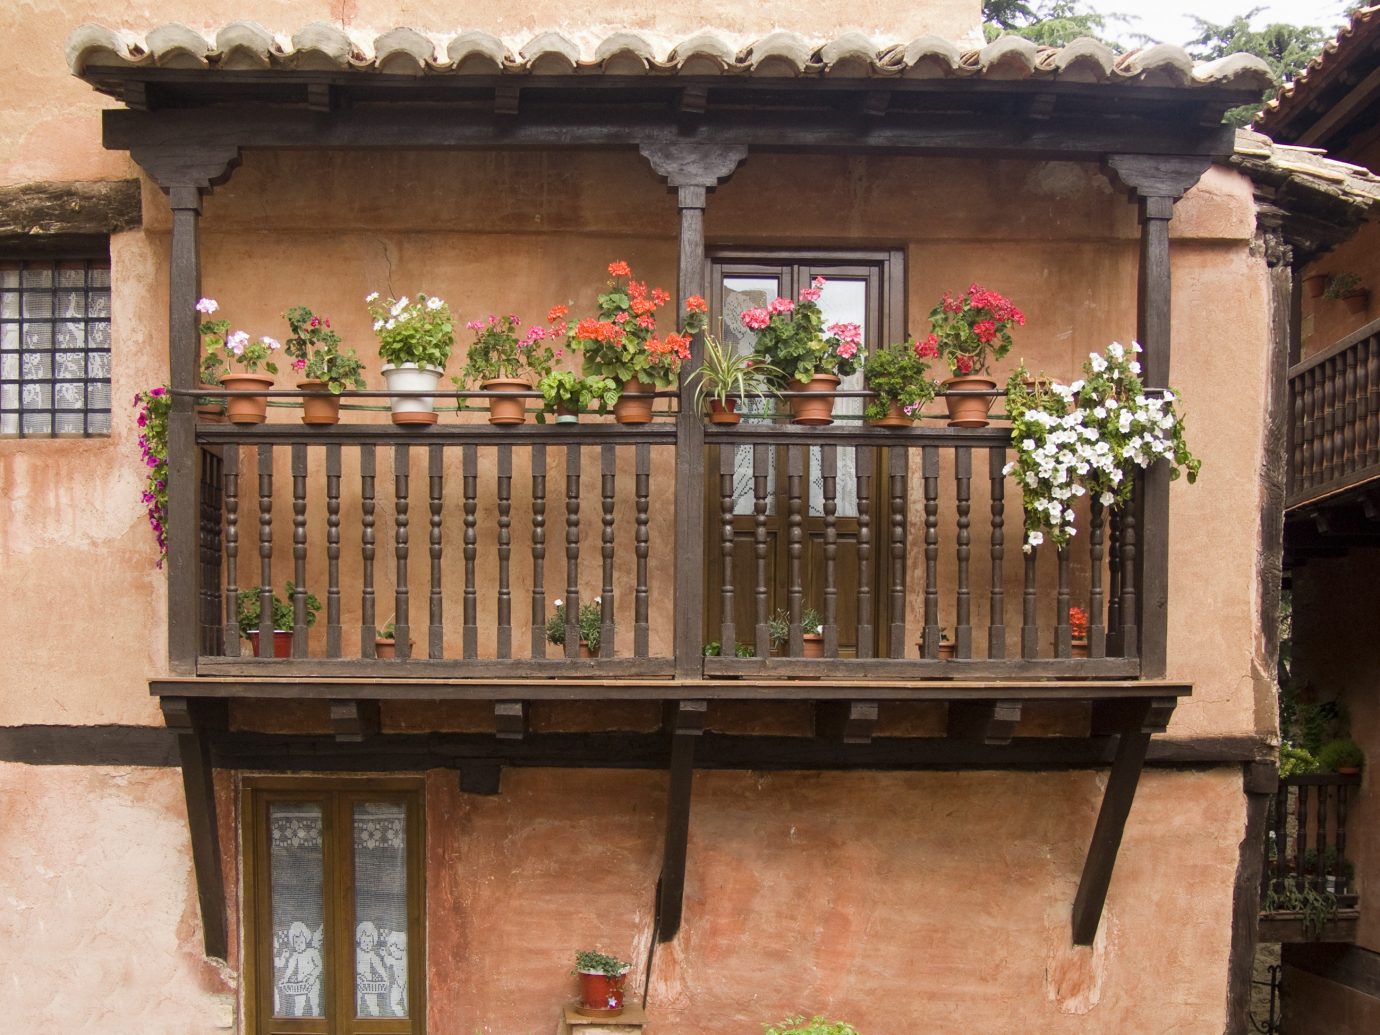 europe Spain Trip Ideas Balcony property facade iron window baluster house outdoor structure gate